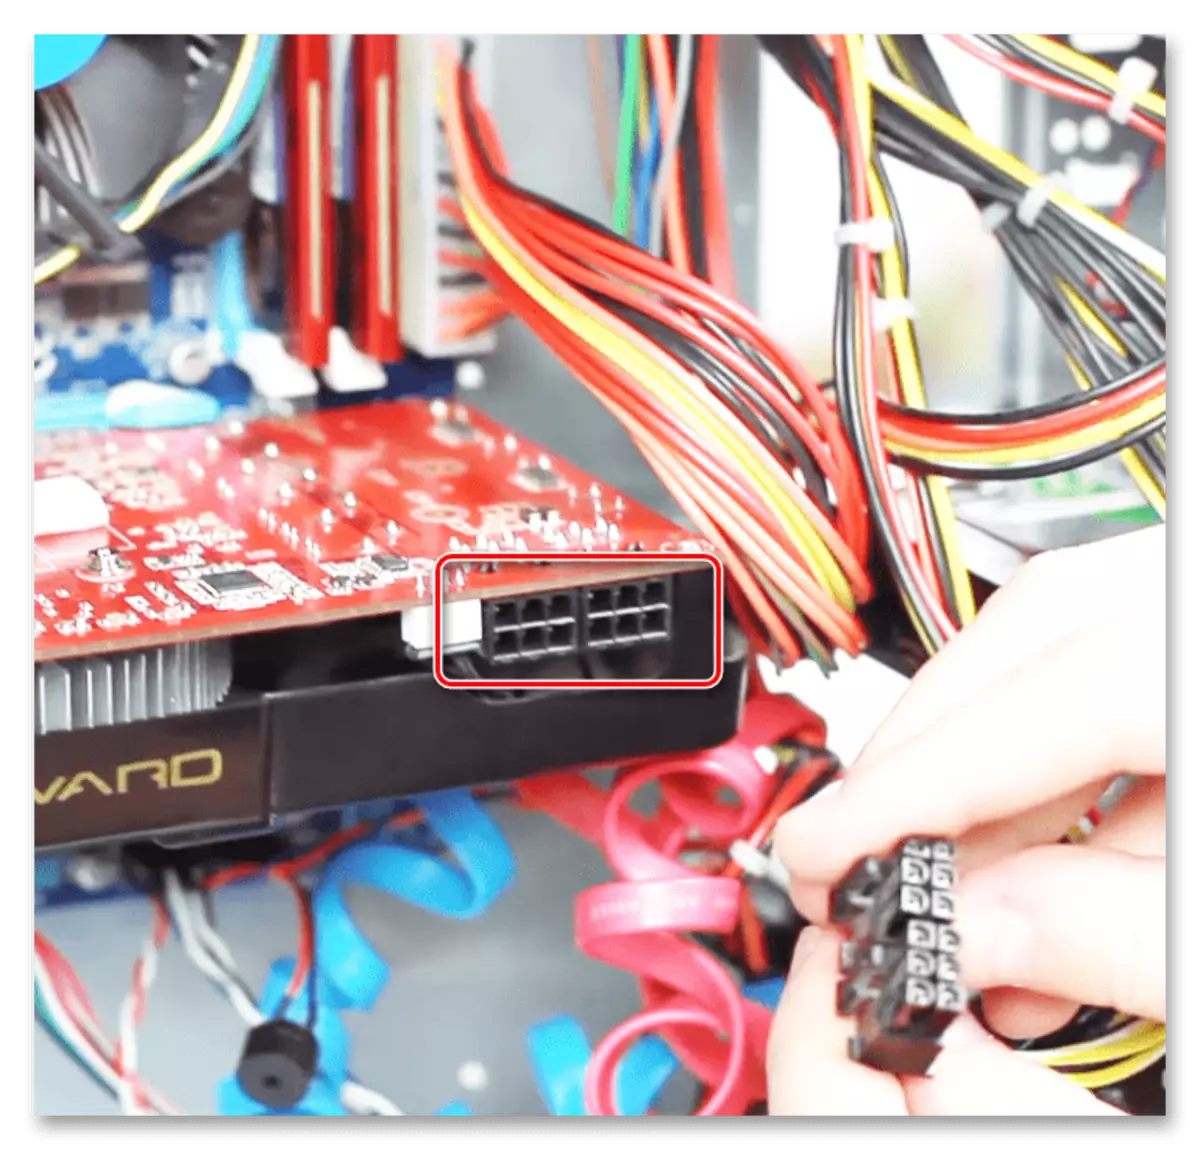 Connecting the video card